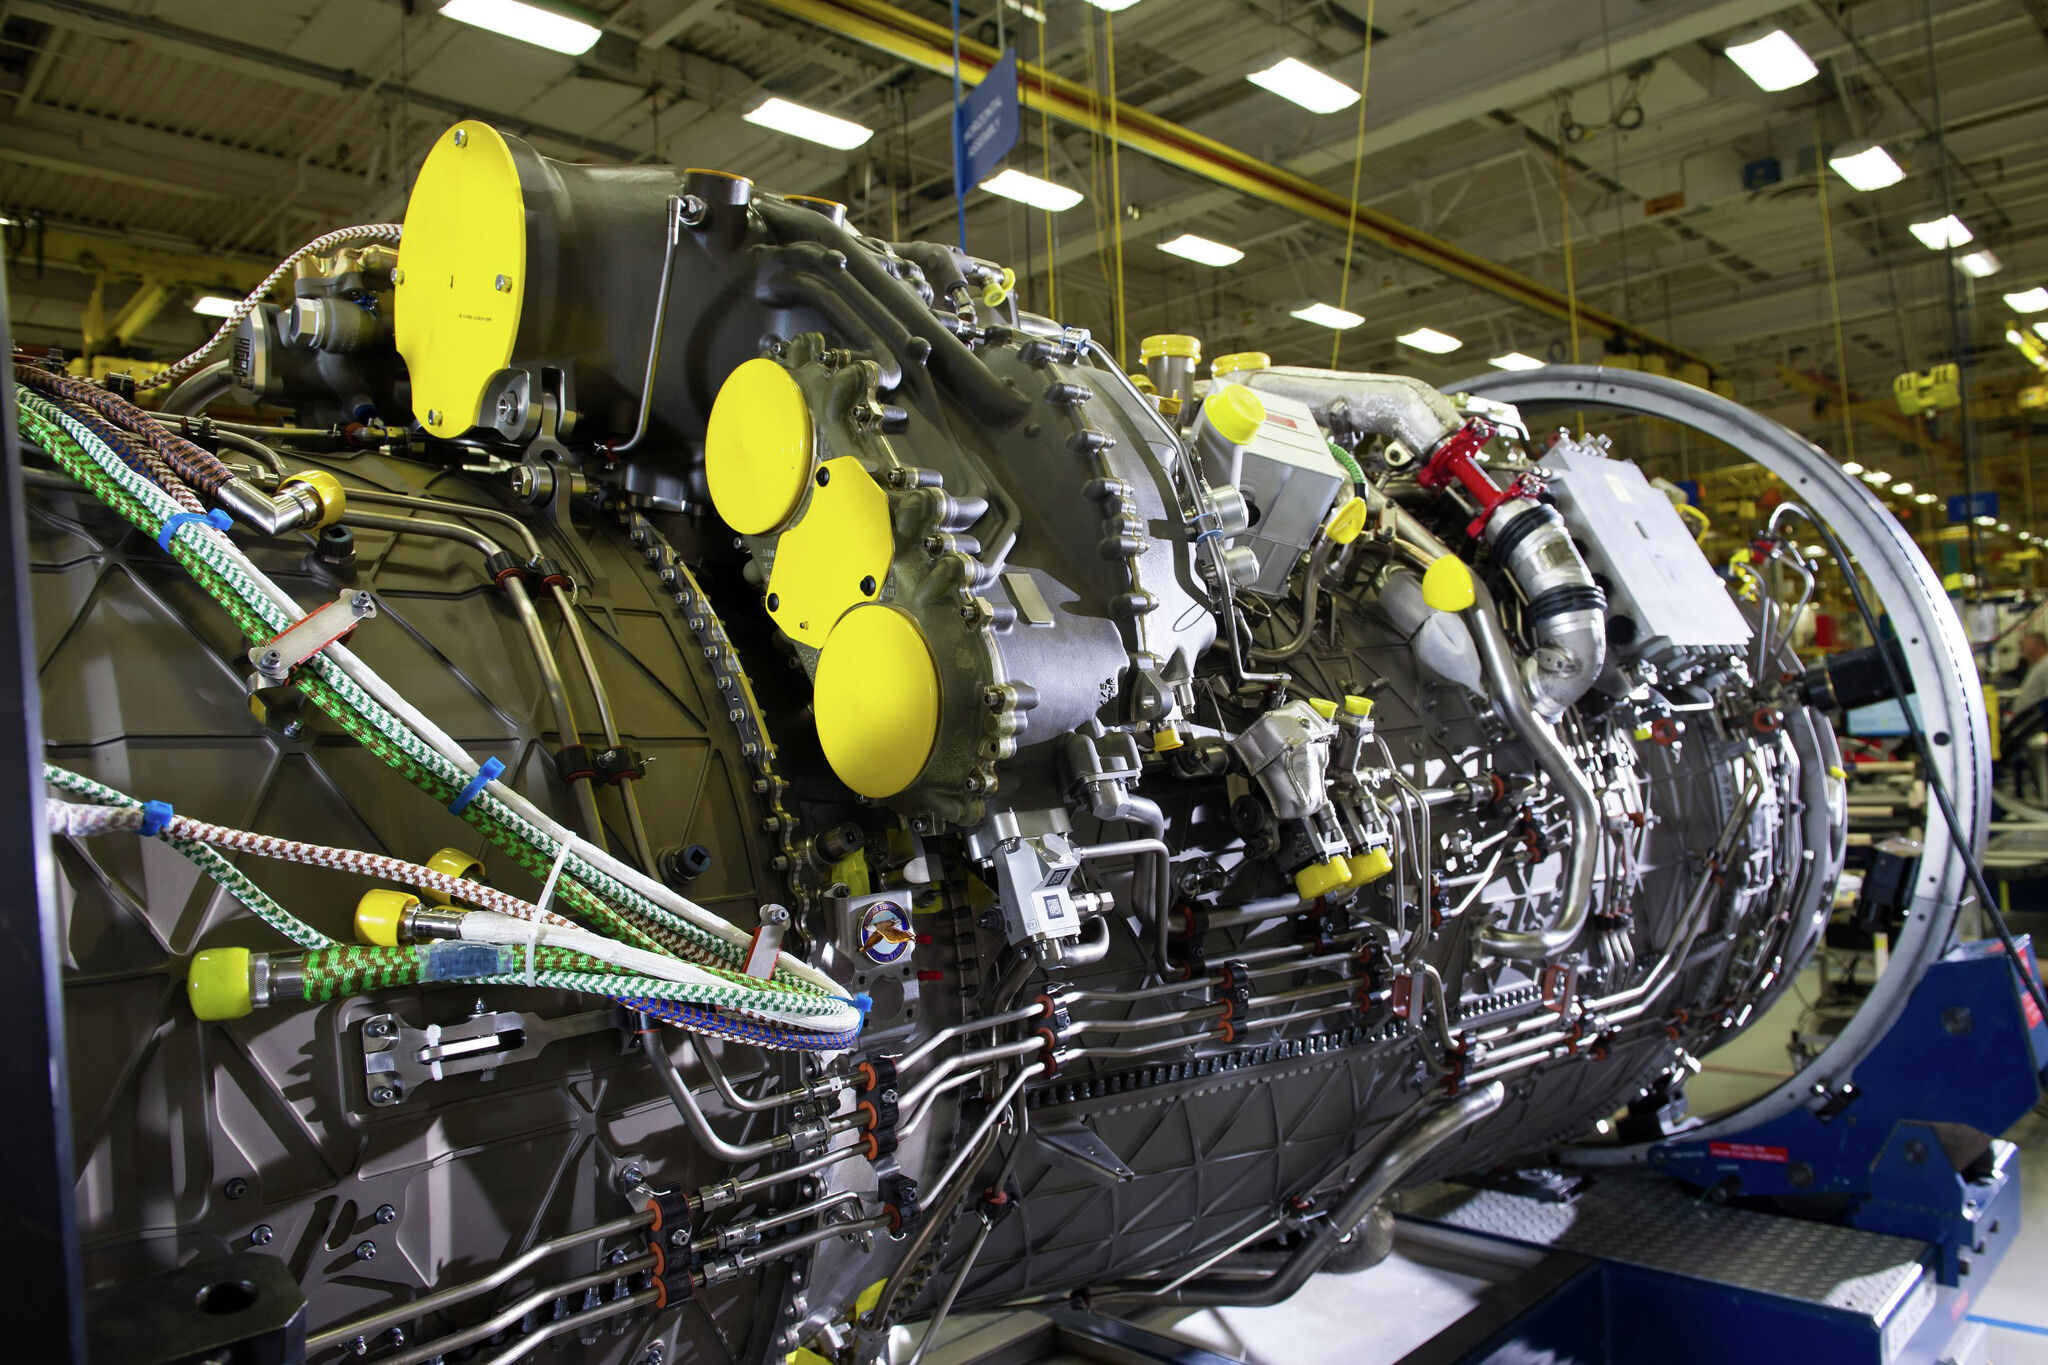 Aircraft Engine Giant Faces $150 Million Lawsuit for Blocking Competitors-